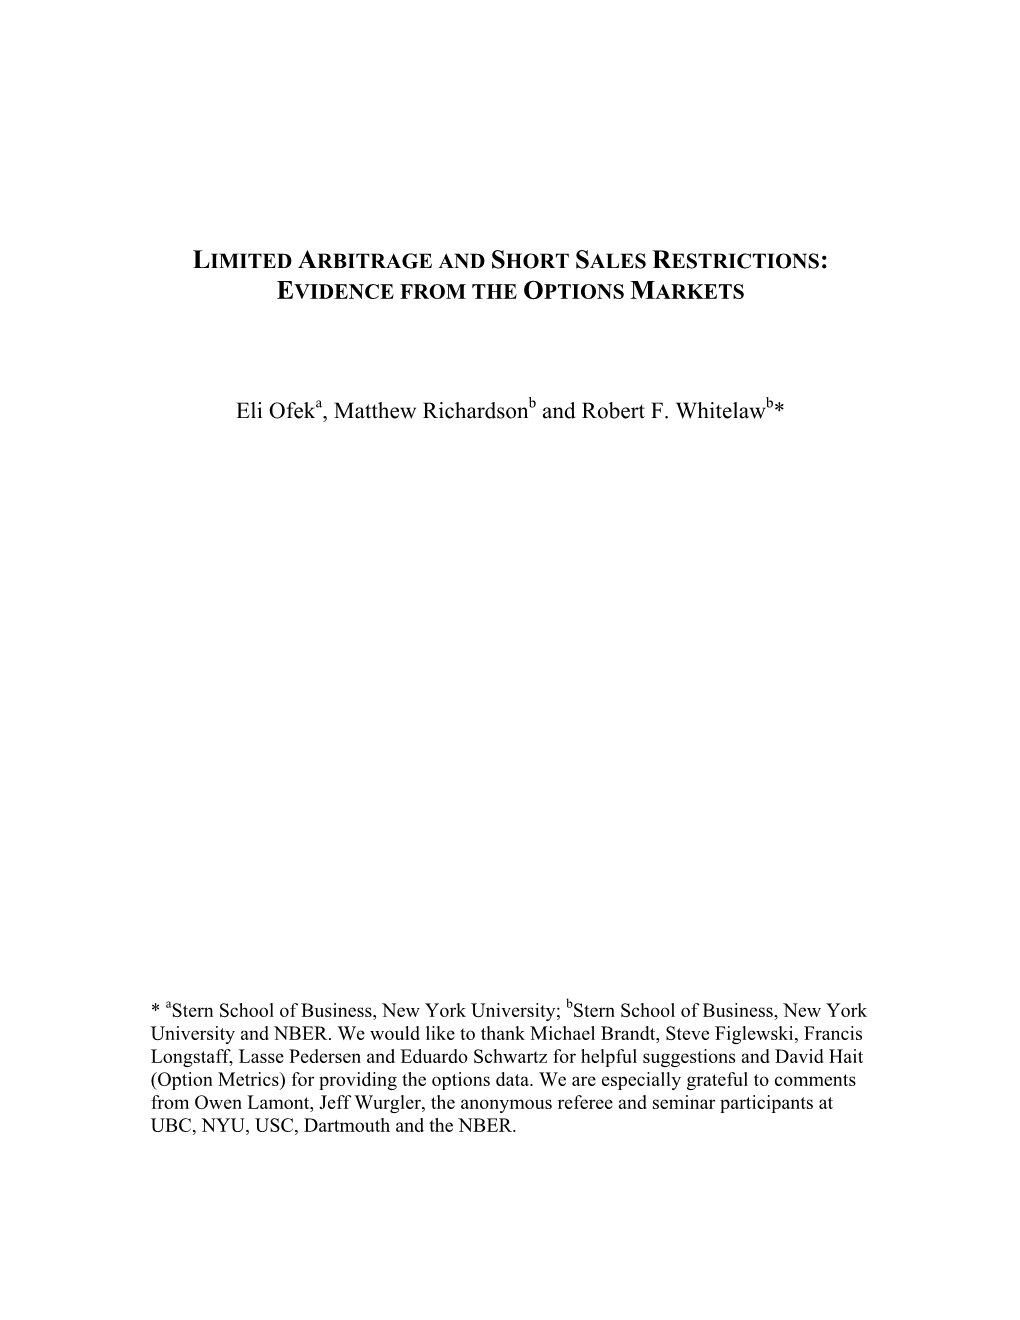 Limited Arbitrage and Short Sales Restrictions: Evidence from the Options Markets